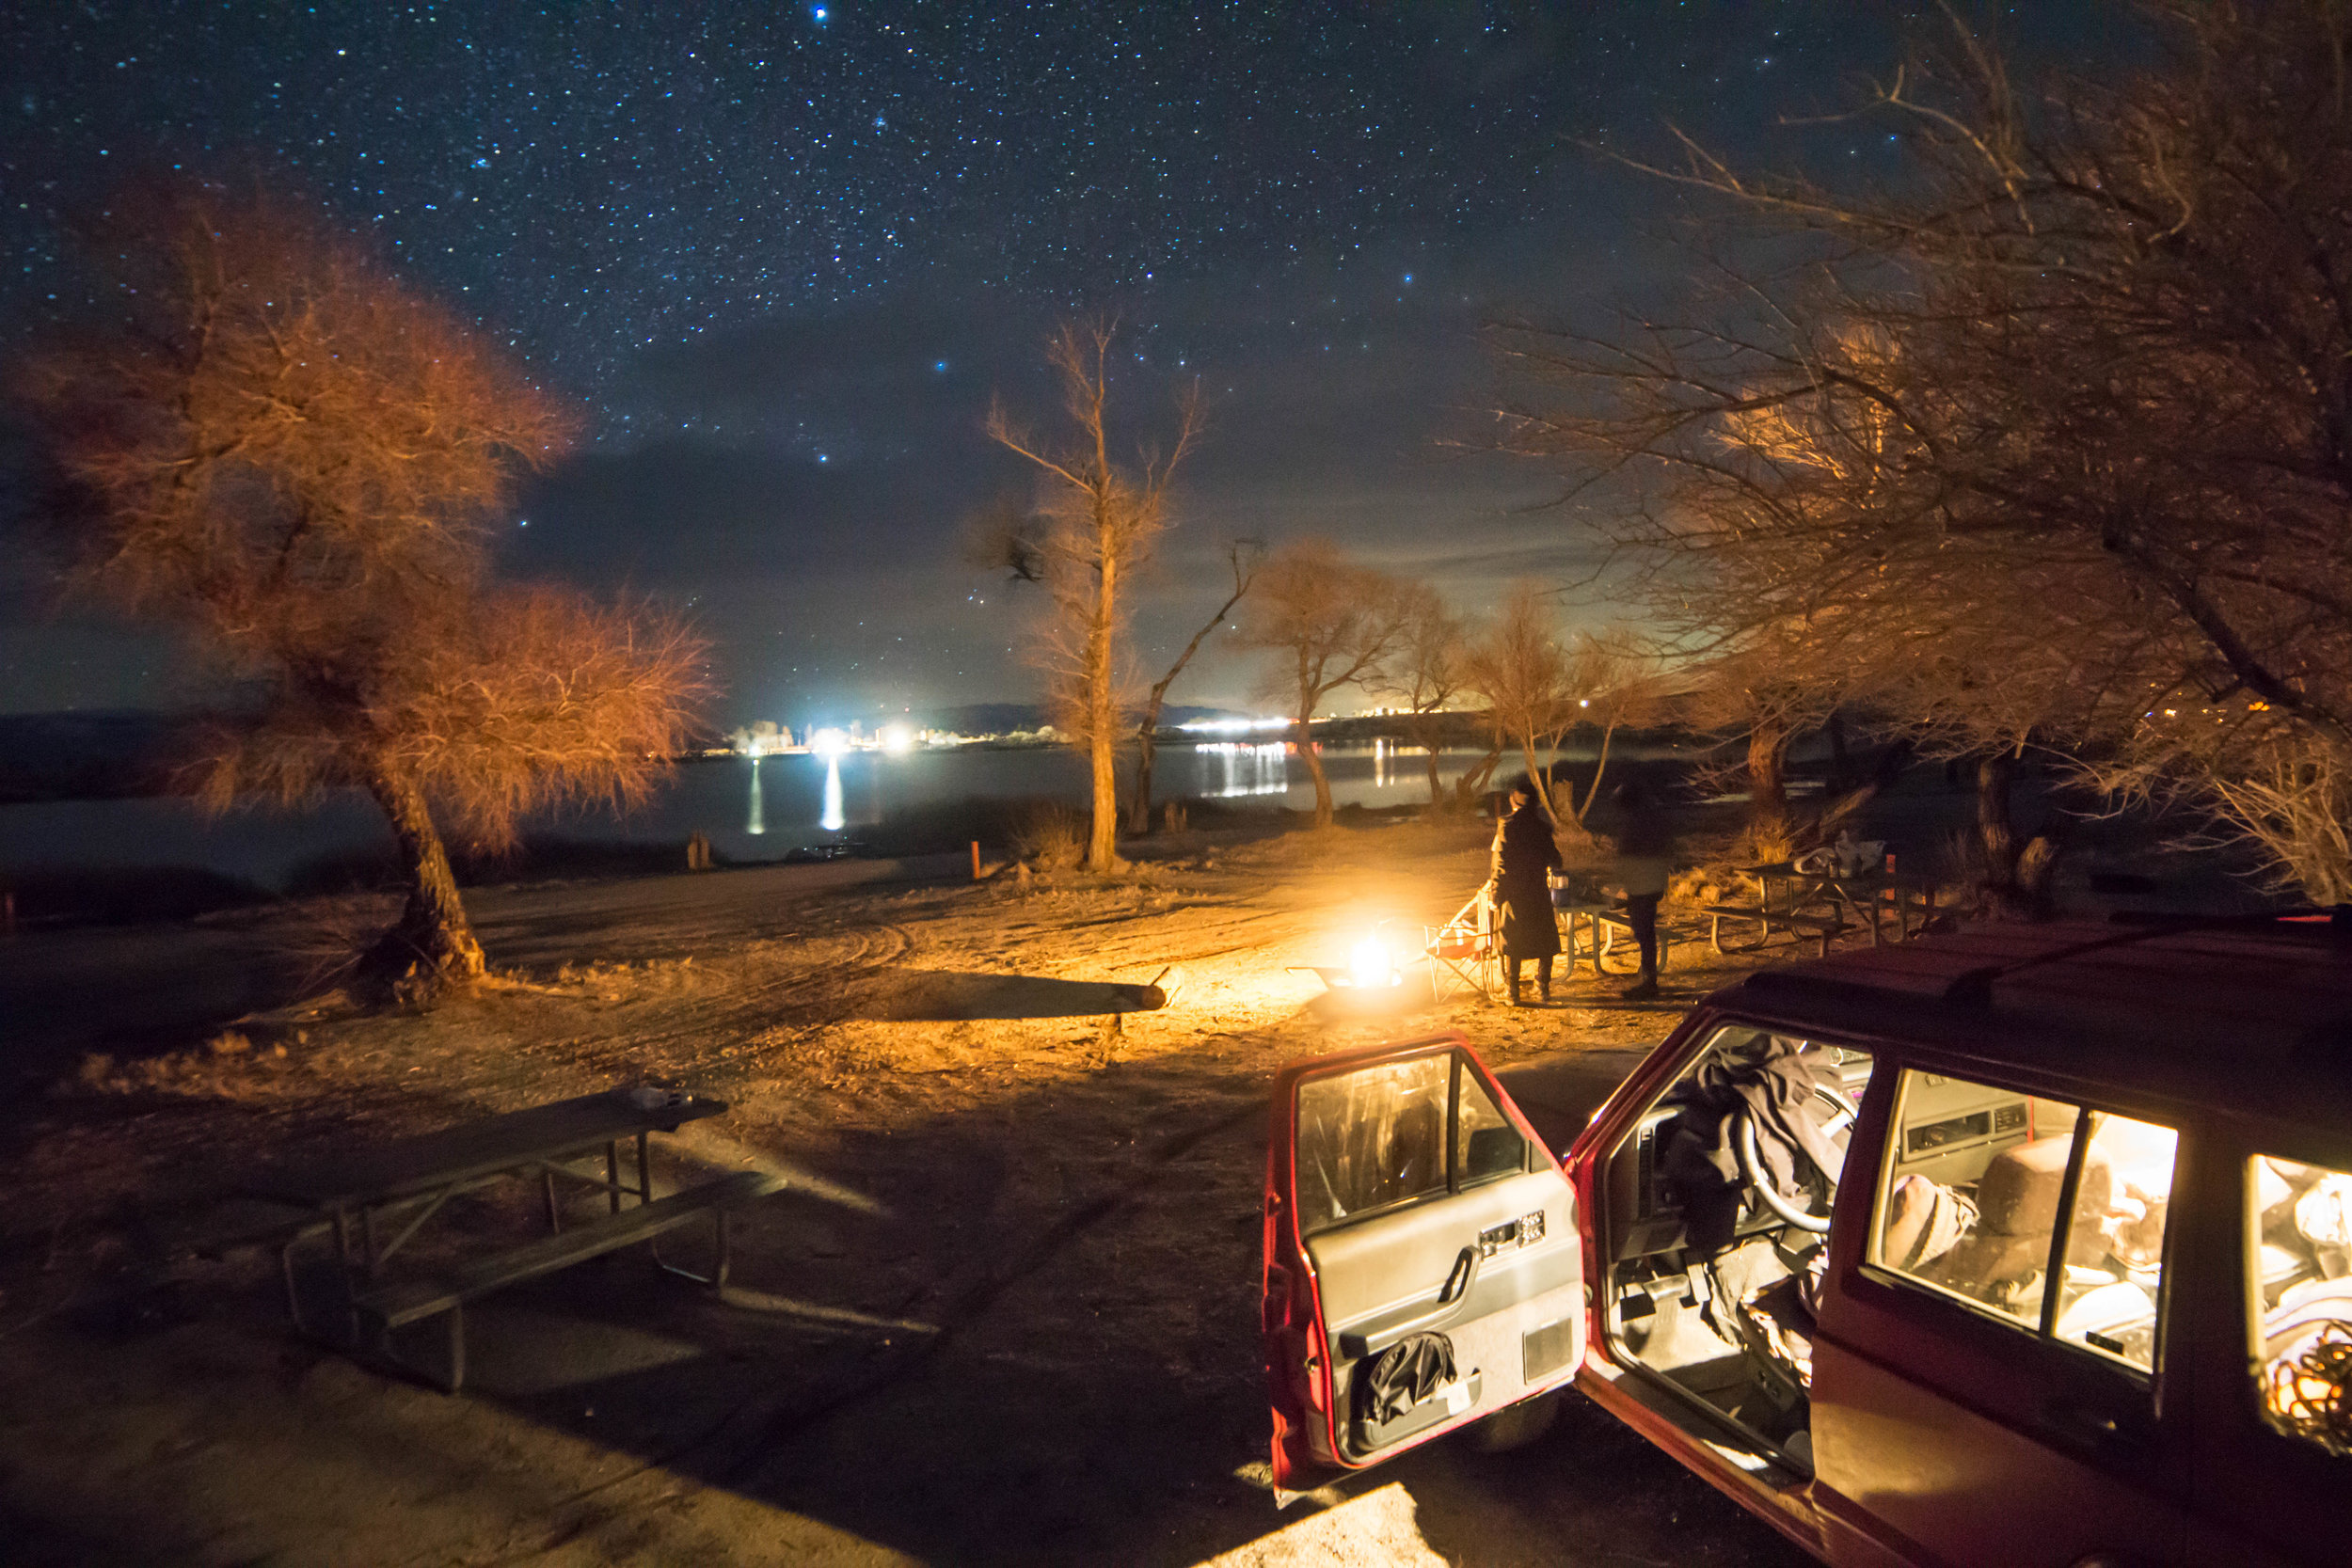 Back at camp, we warm ourselves around the fire as the stars peak behind the clouds to begin their nightly dance.